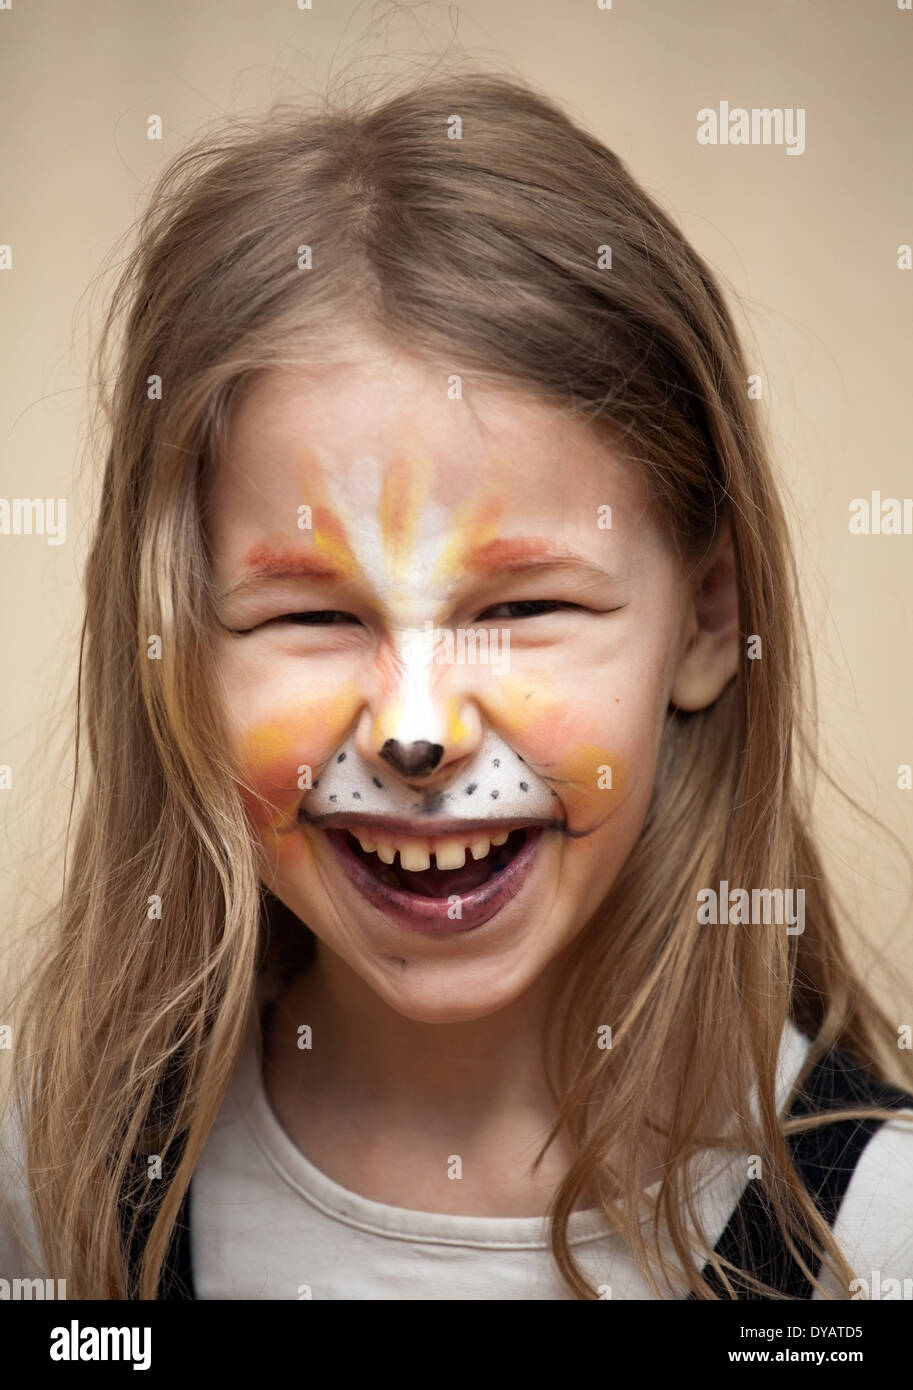 closeup portrait of little girl with cat painting makeup on the face looking at camera Stock Photo